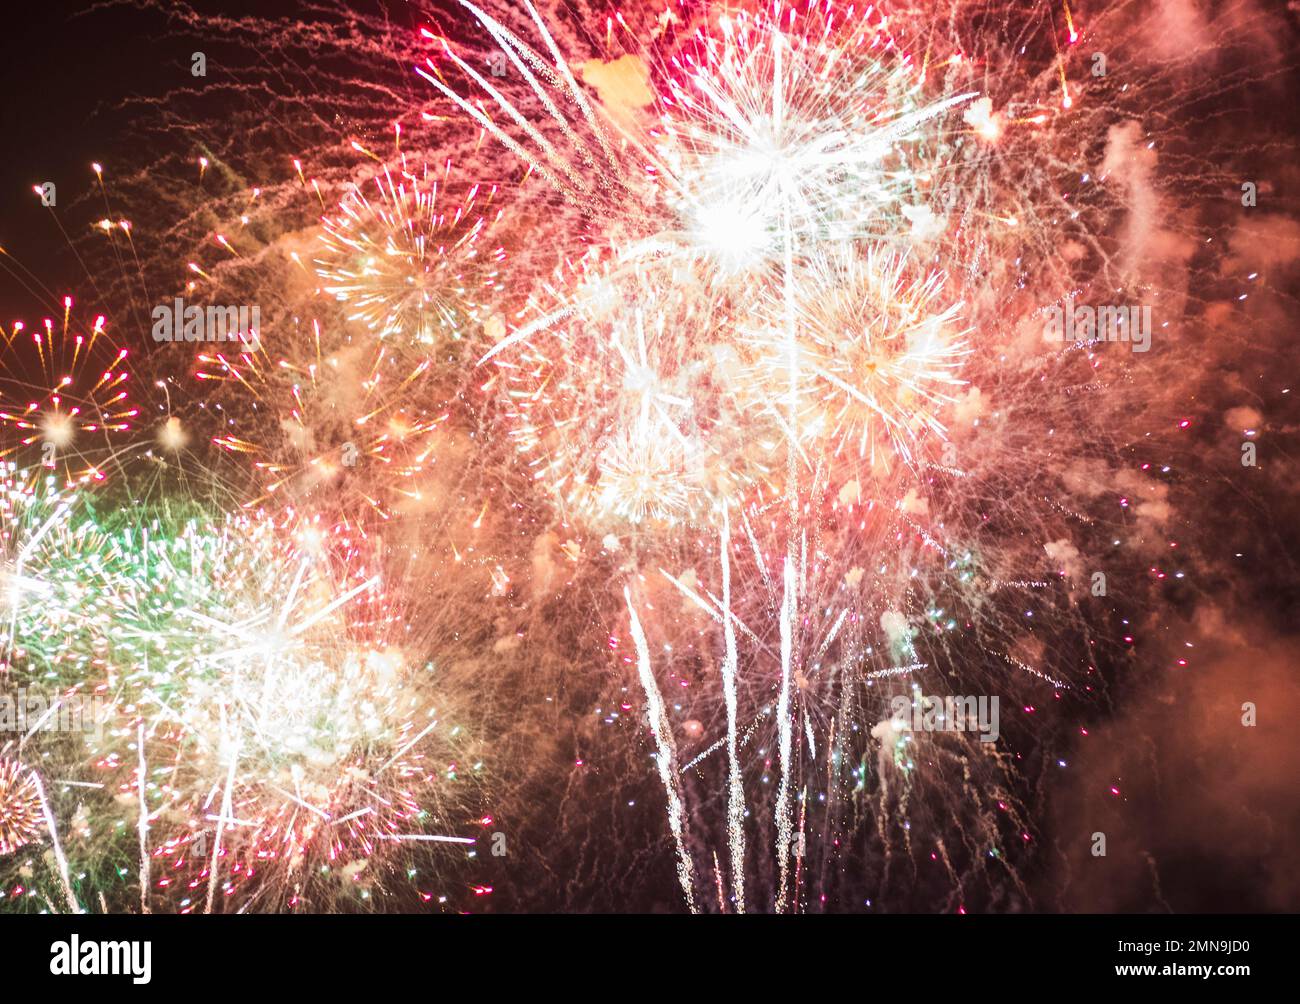 Shot of a firework in the night sky Stock Photo